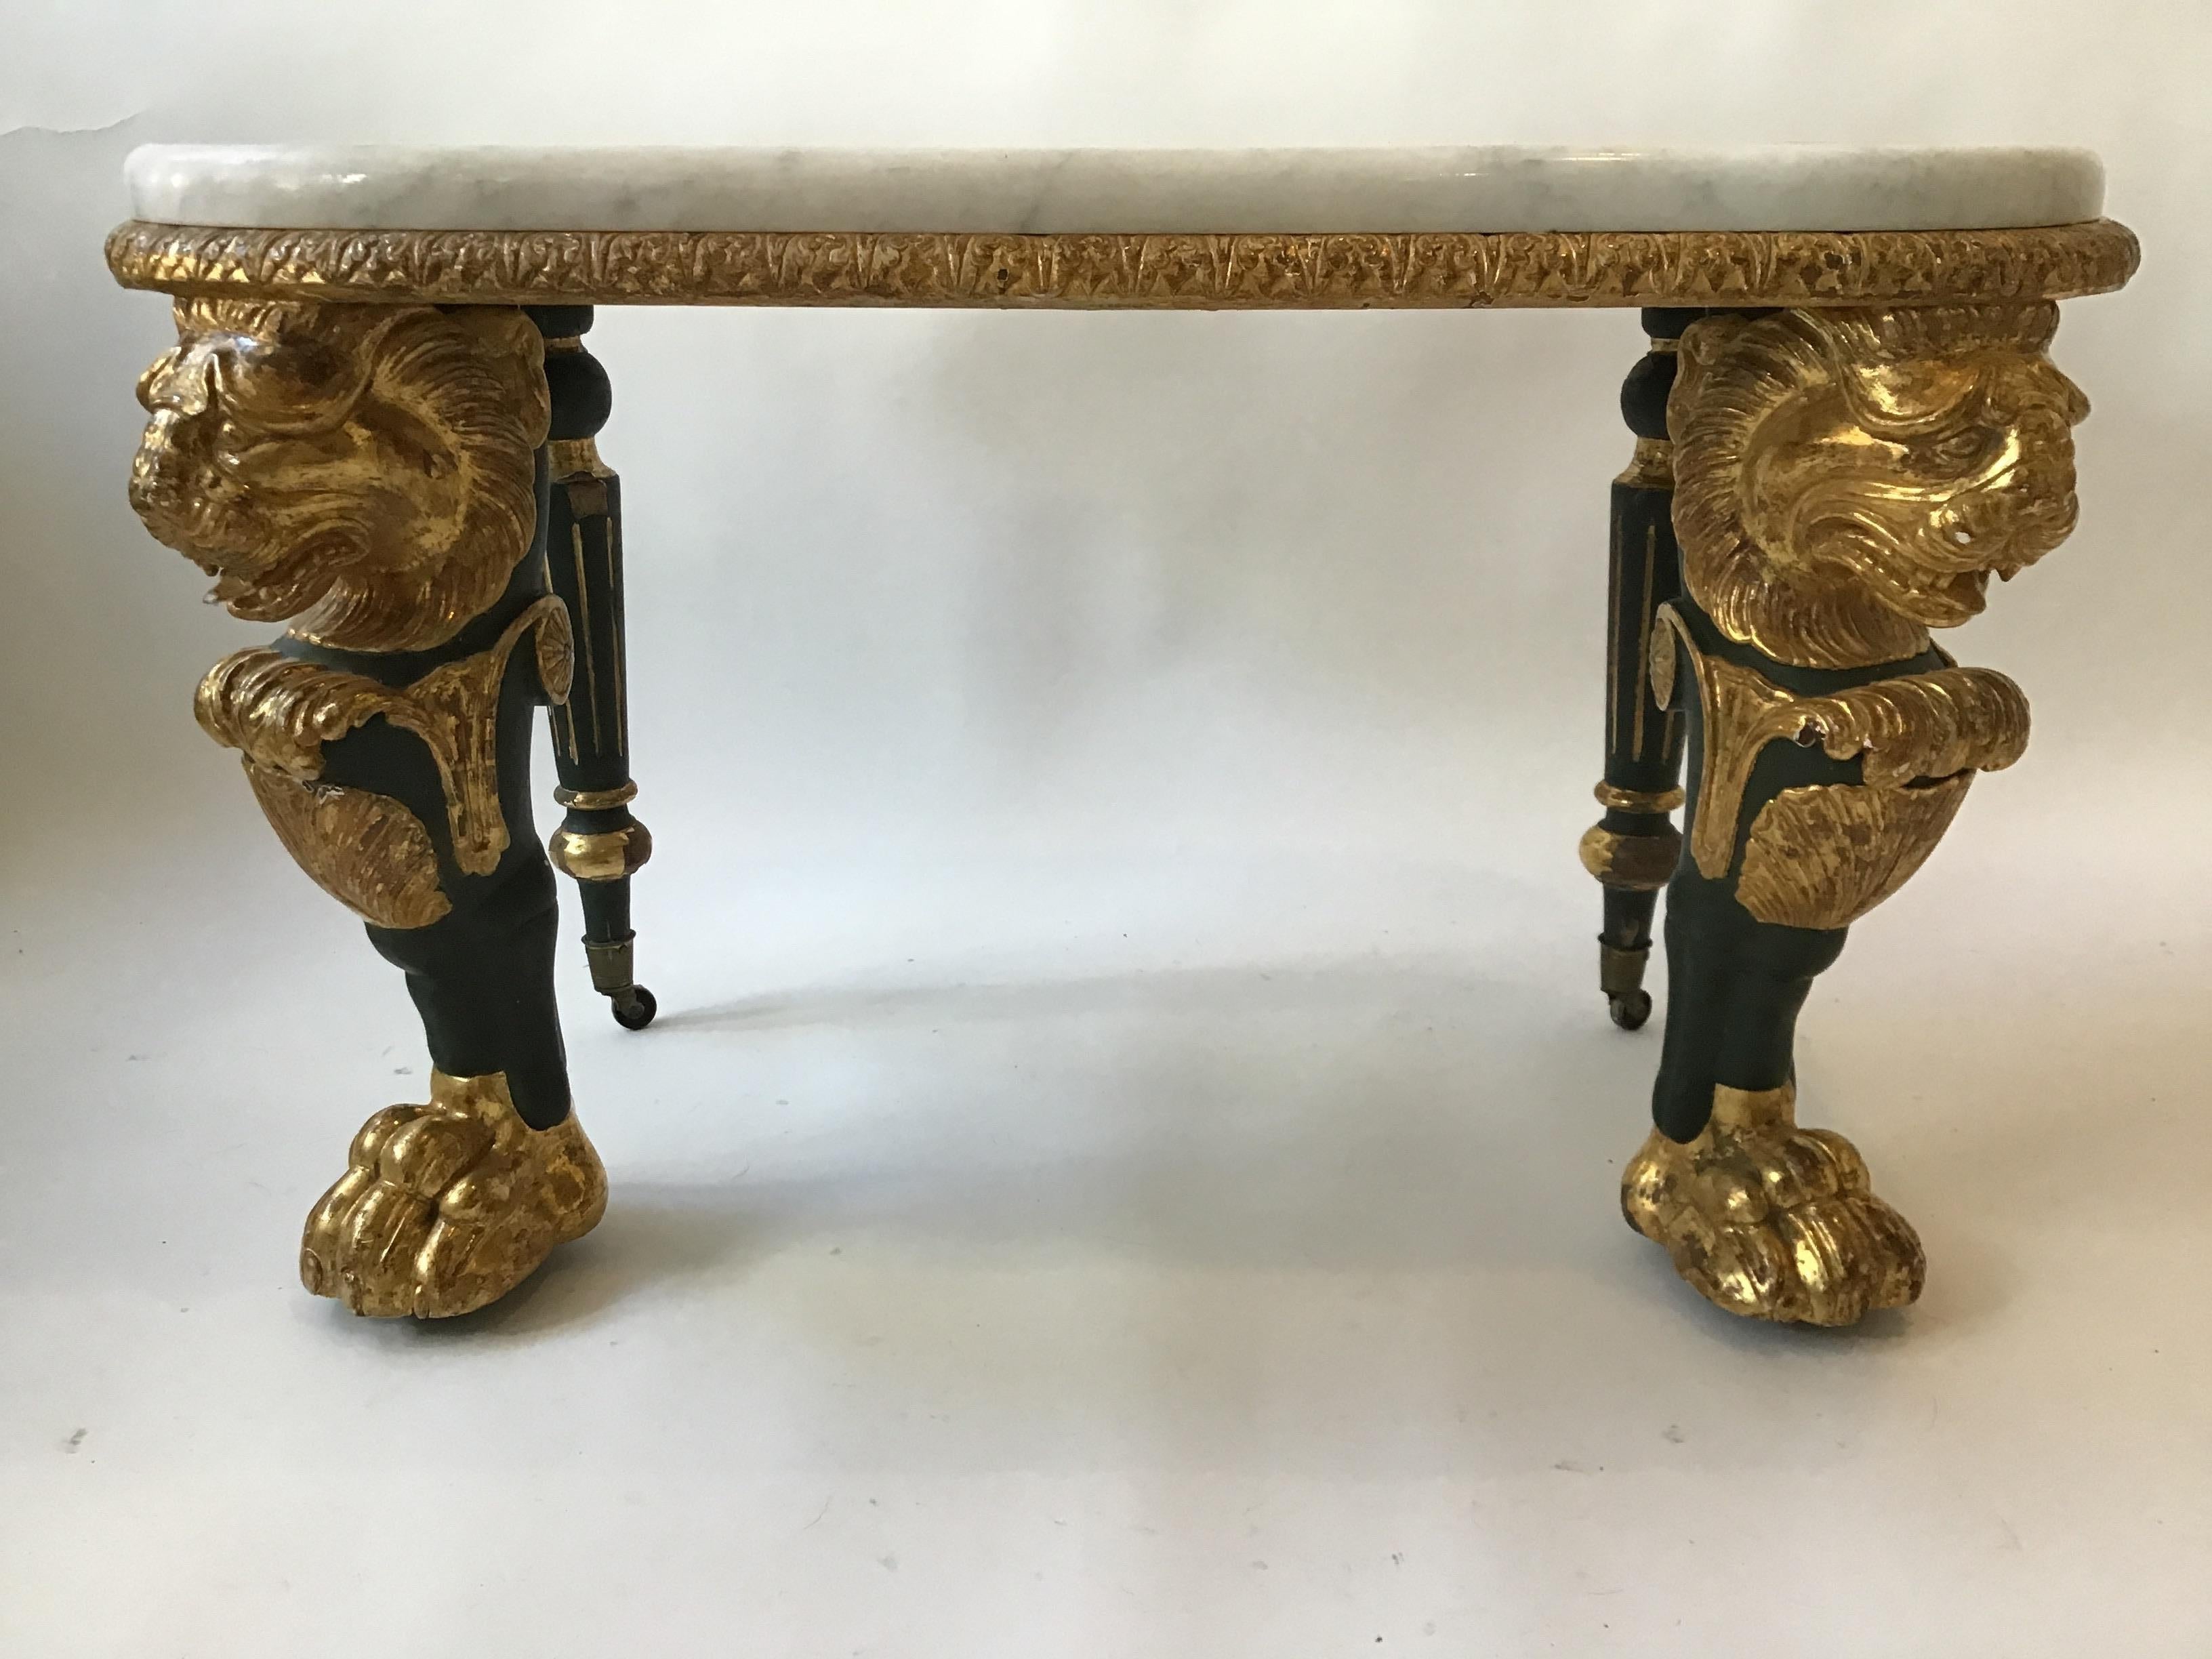 1880s French gilt lion legged table with marble top. Hand carved wood. From a Park Ave apartment.